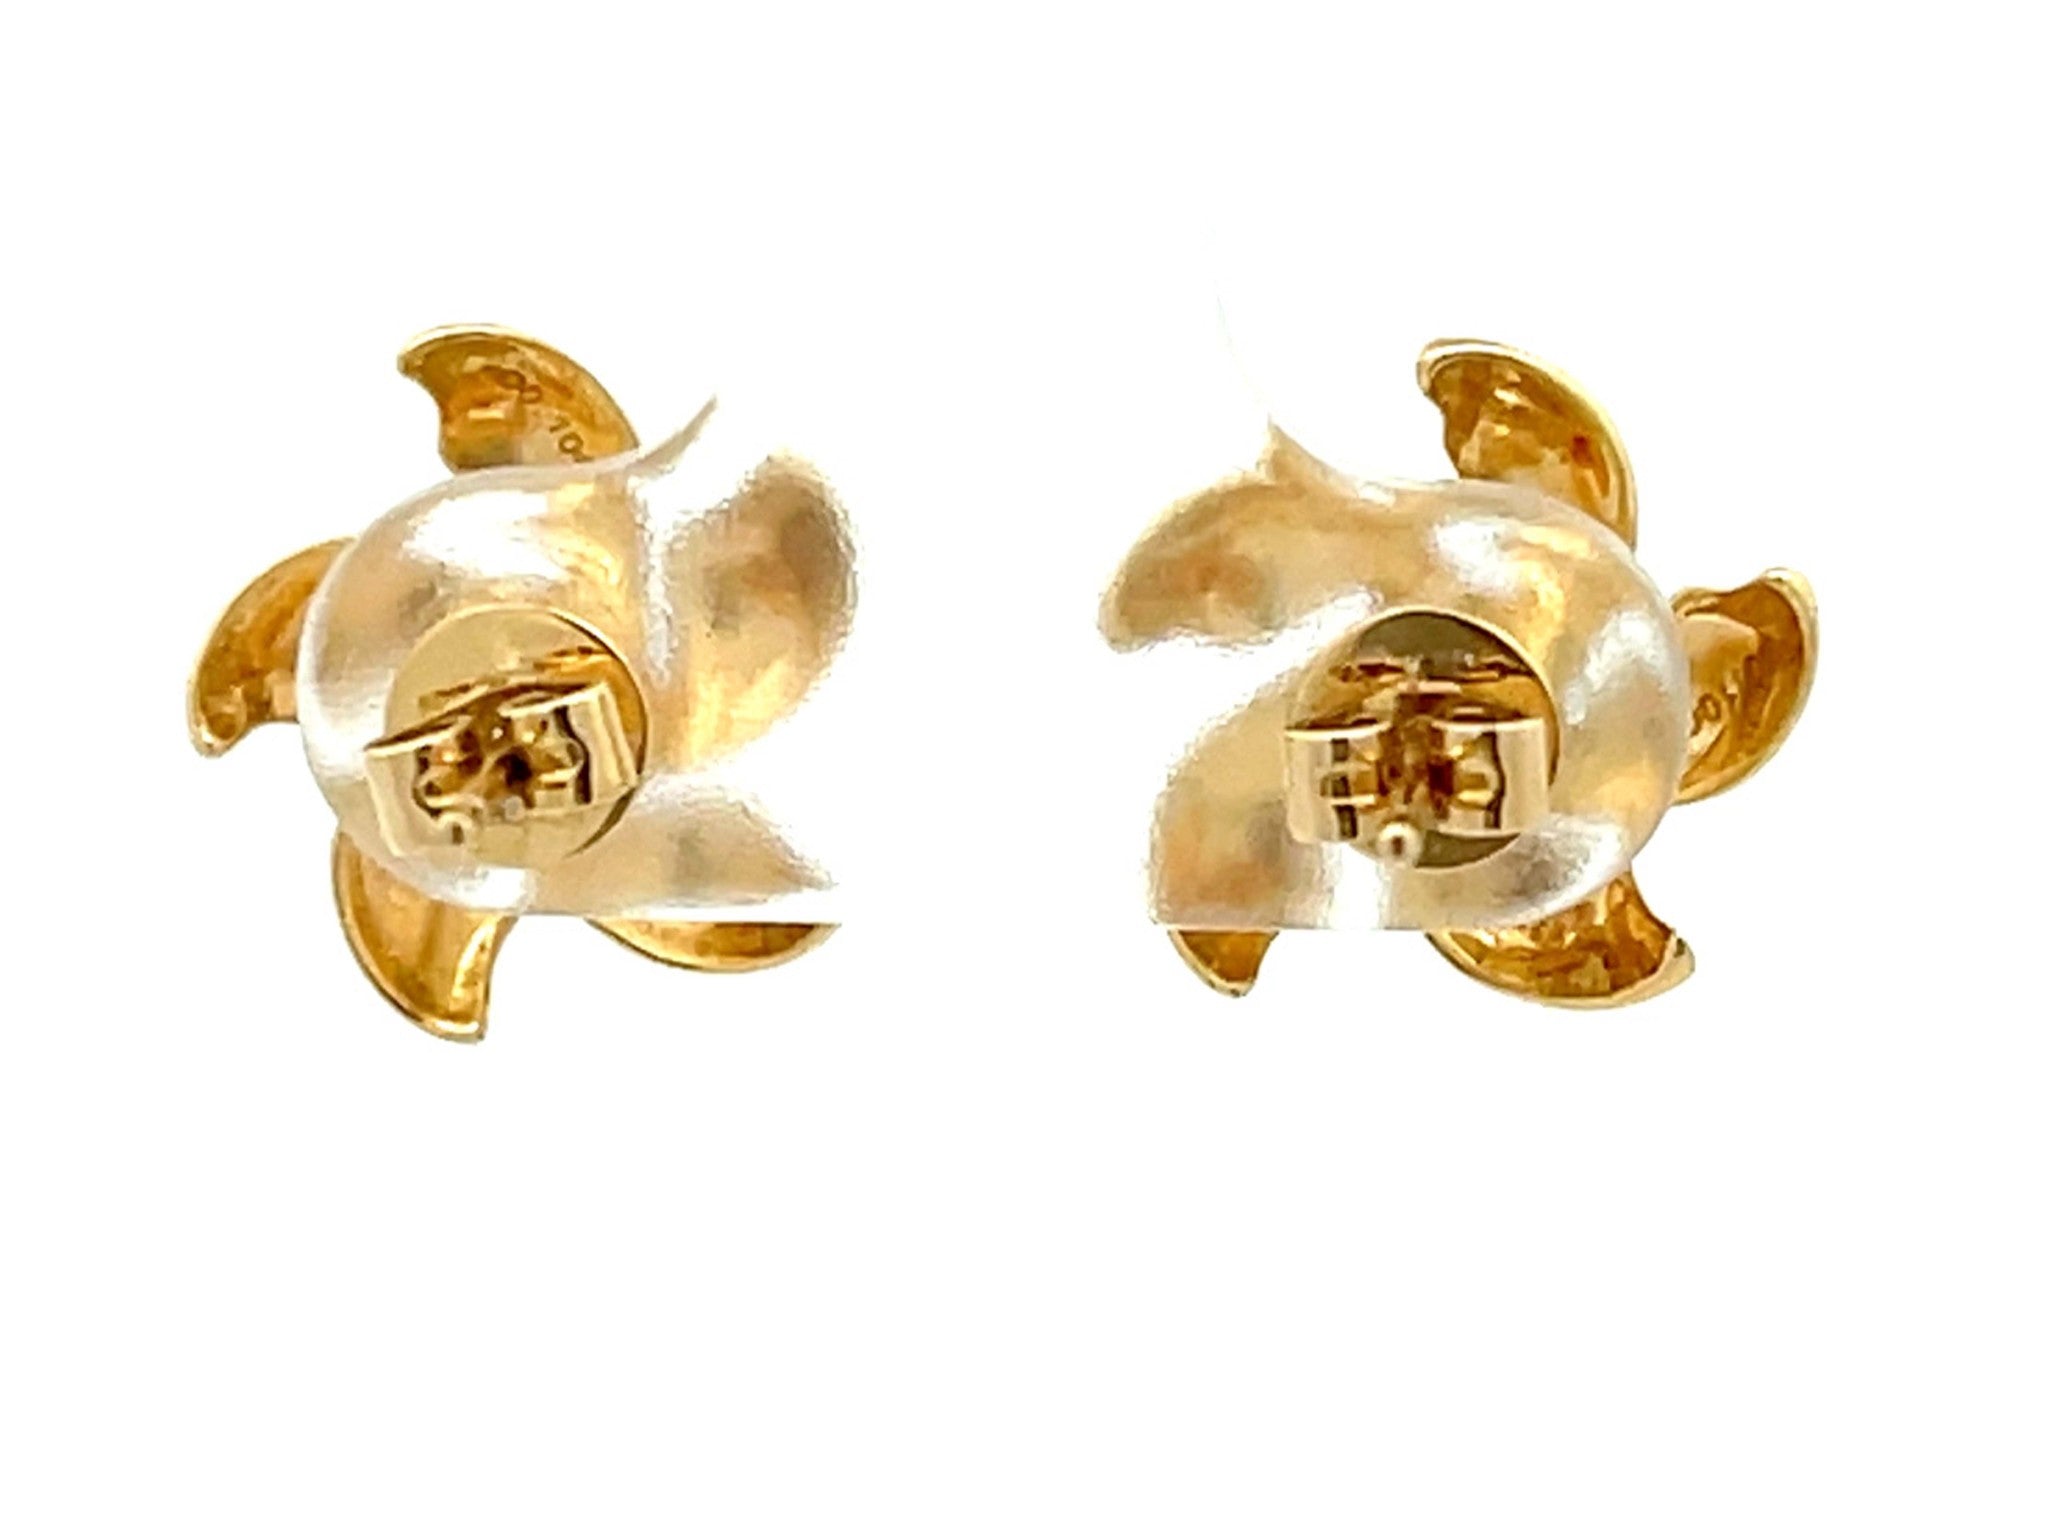 Flower and Diamond Stud Earrings in Satin Finish 14K Yellow Gold